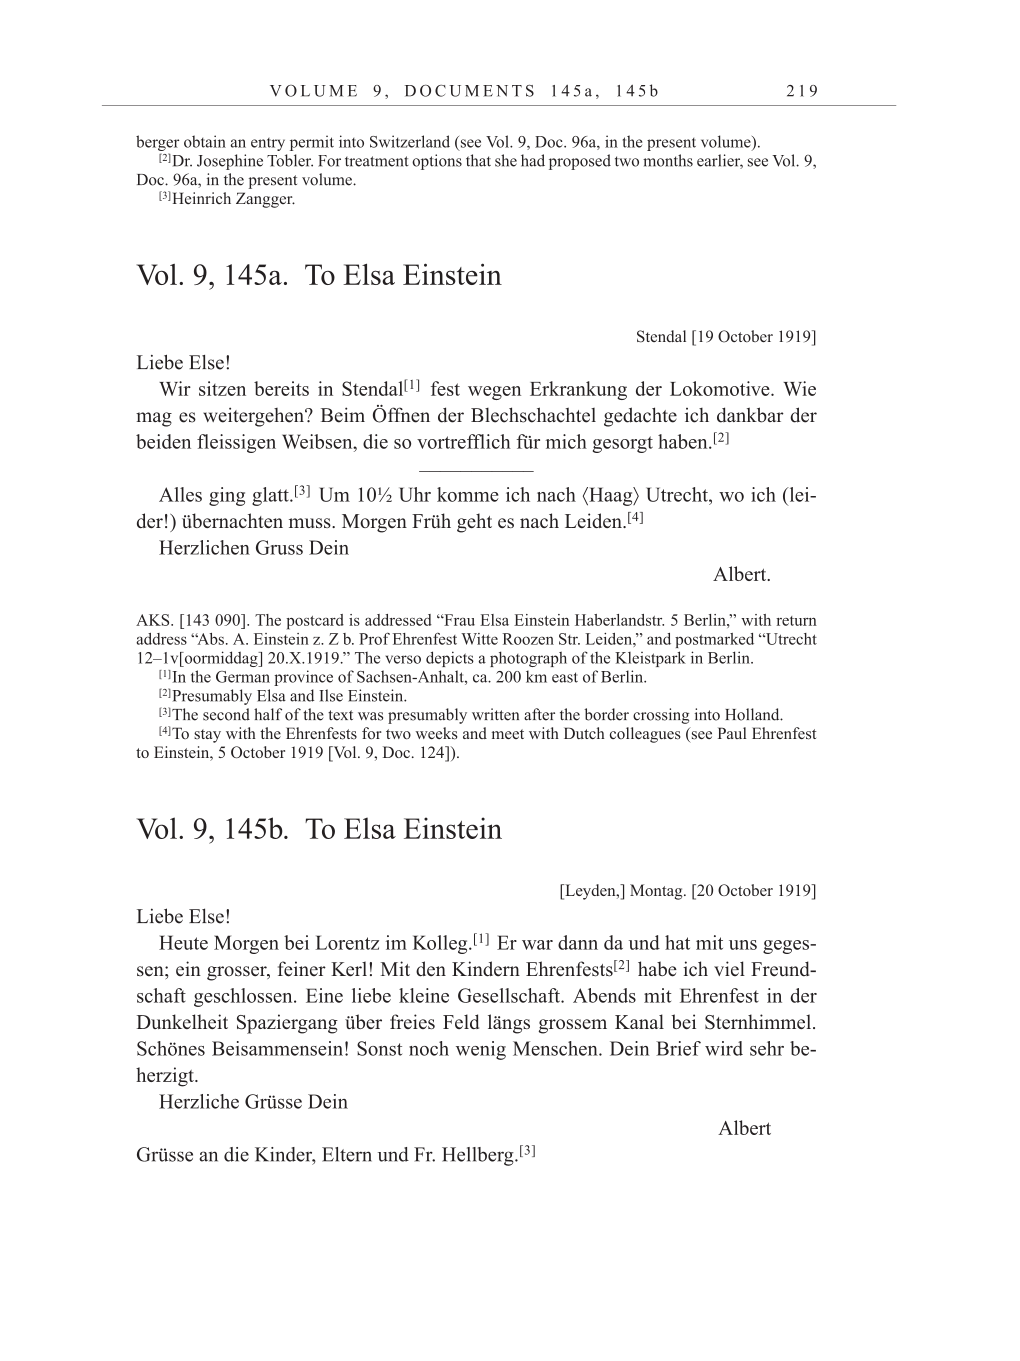 Volume 10: The Berlin Years: Correspondence May-December 1920 / Supplementary Correspondence 1909-1920 page 219